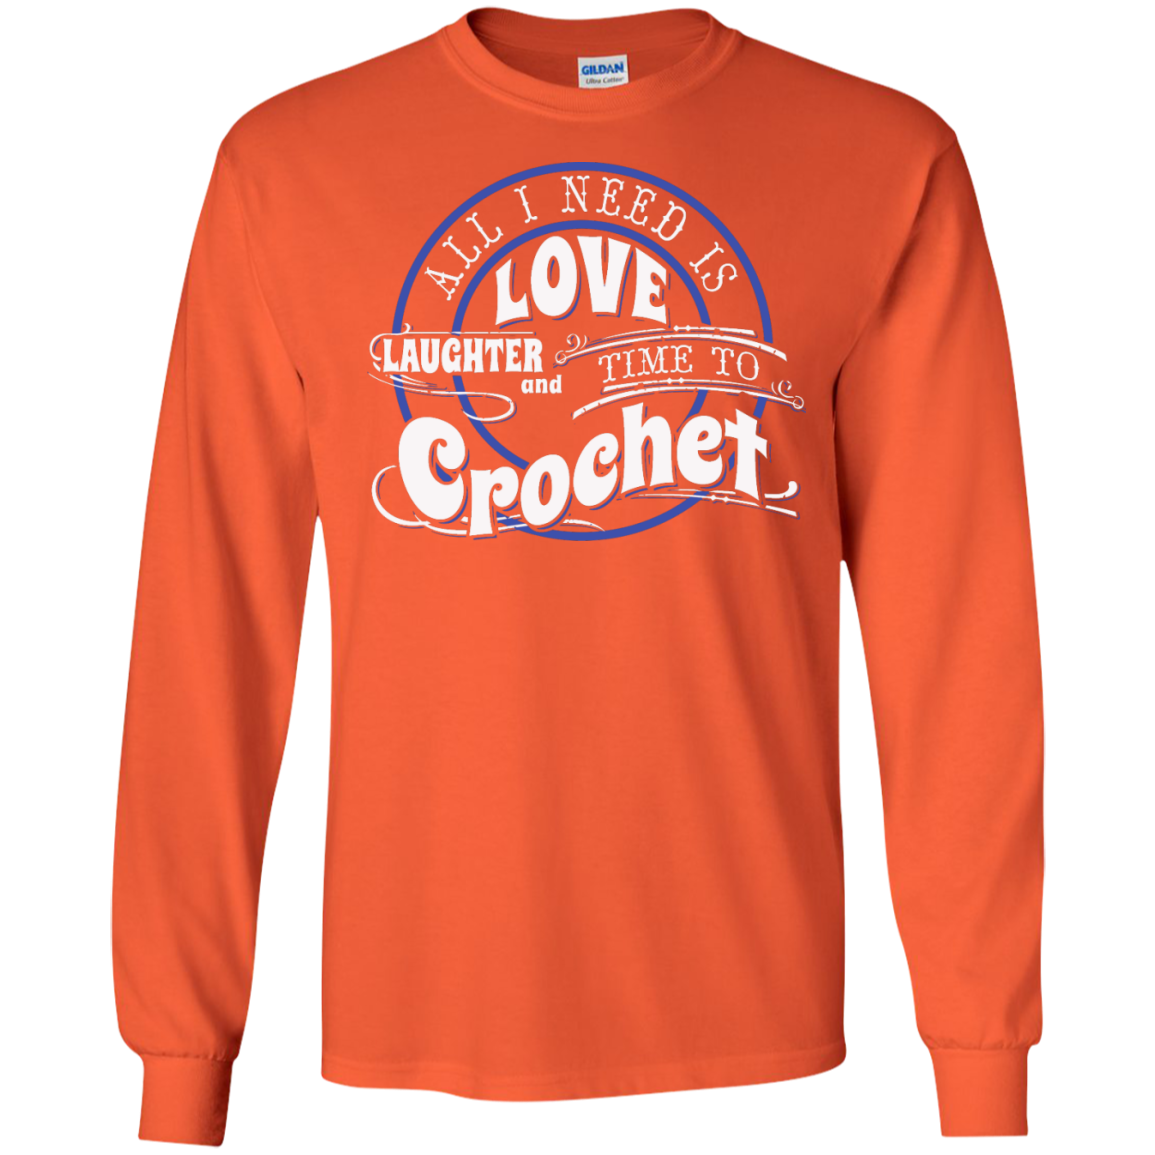 Time to Crochet Long Sleeve Ultra Cotton T-Shirt - Crafter4Life - 3